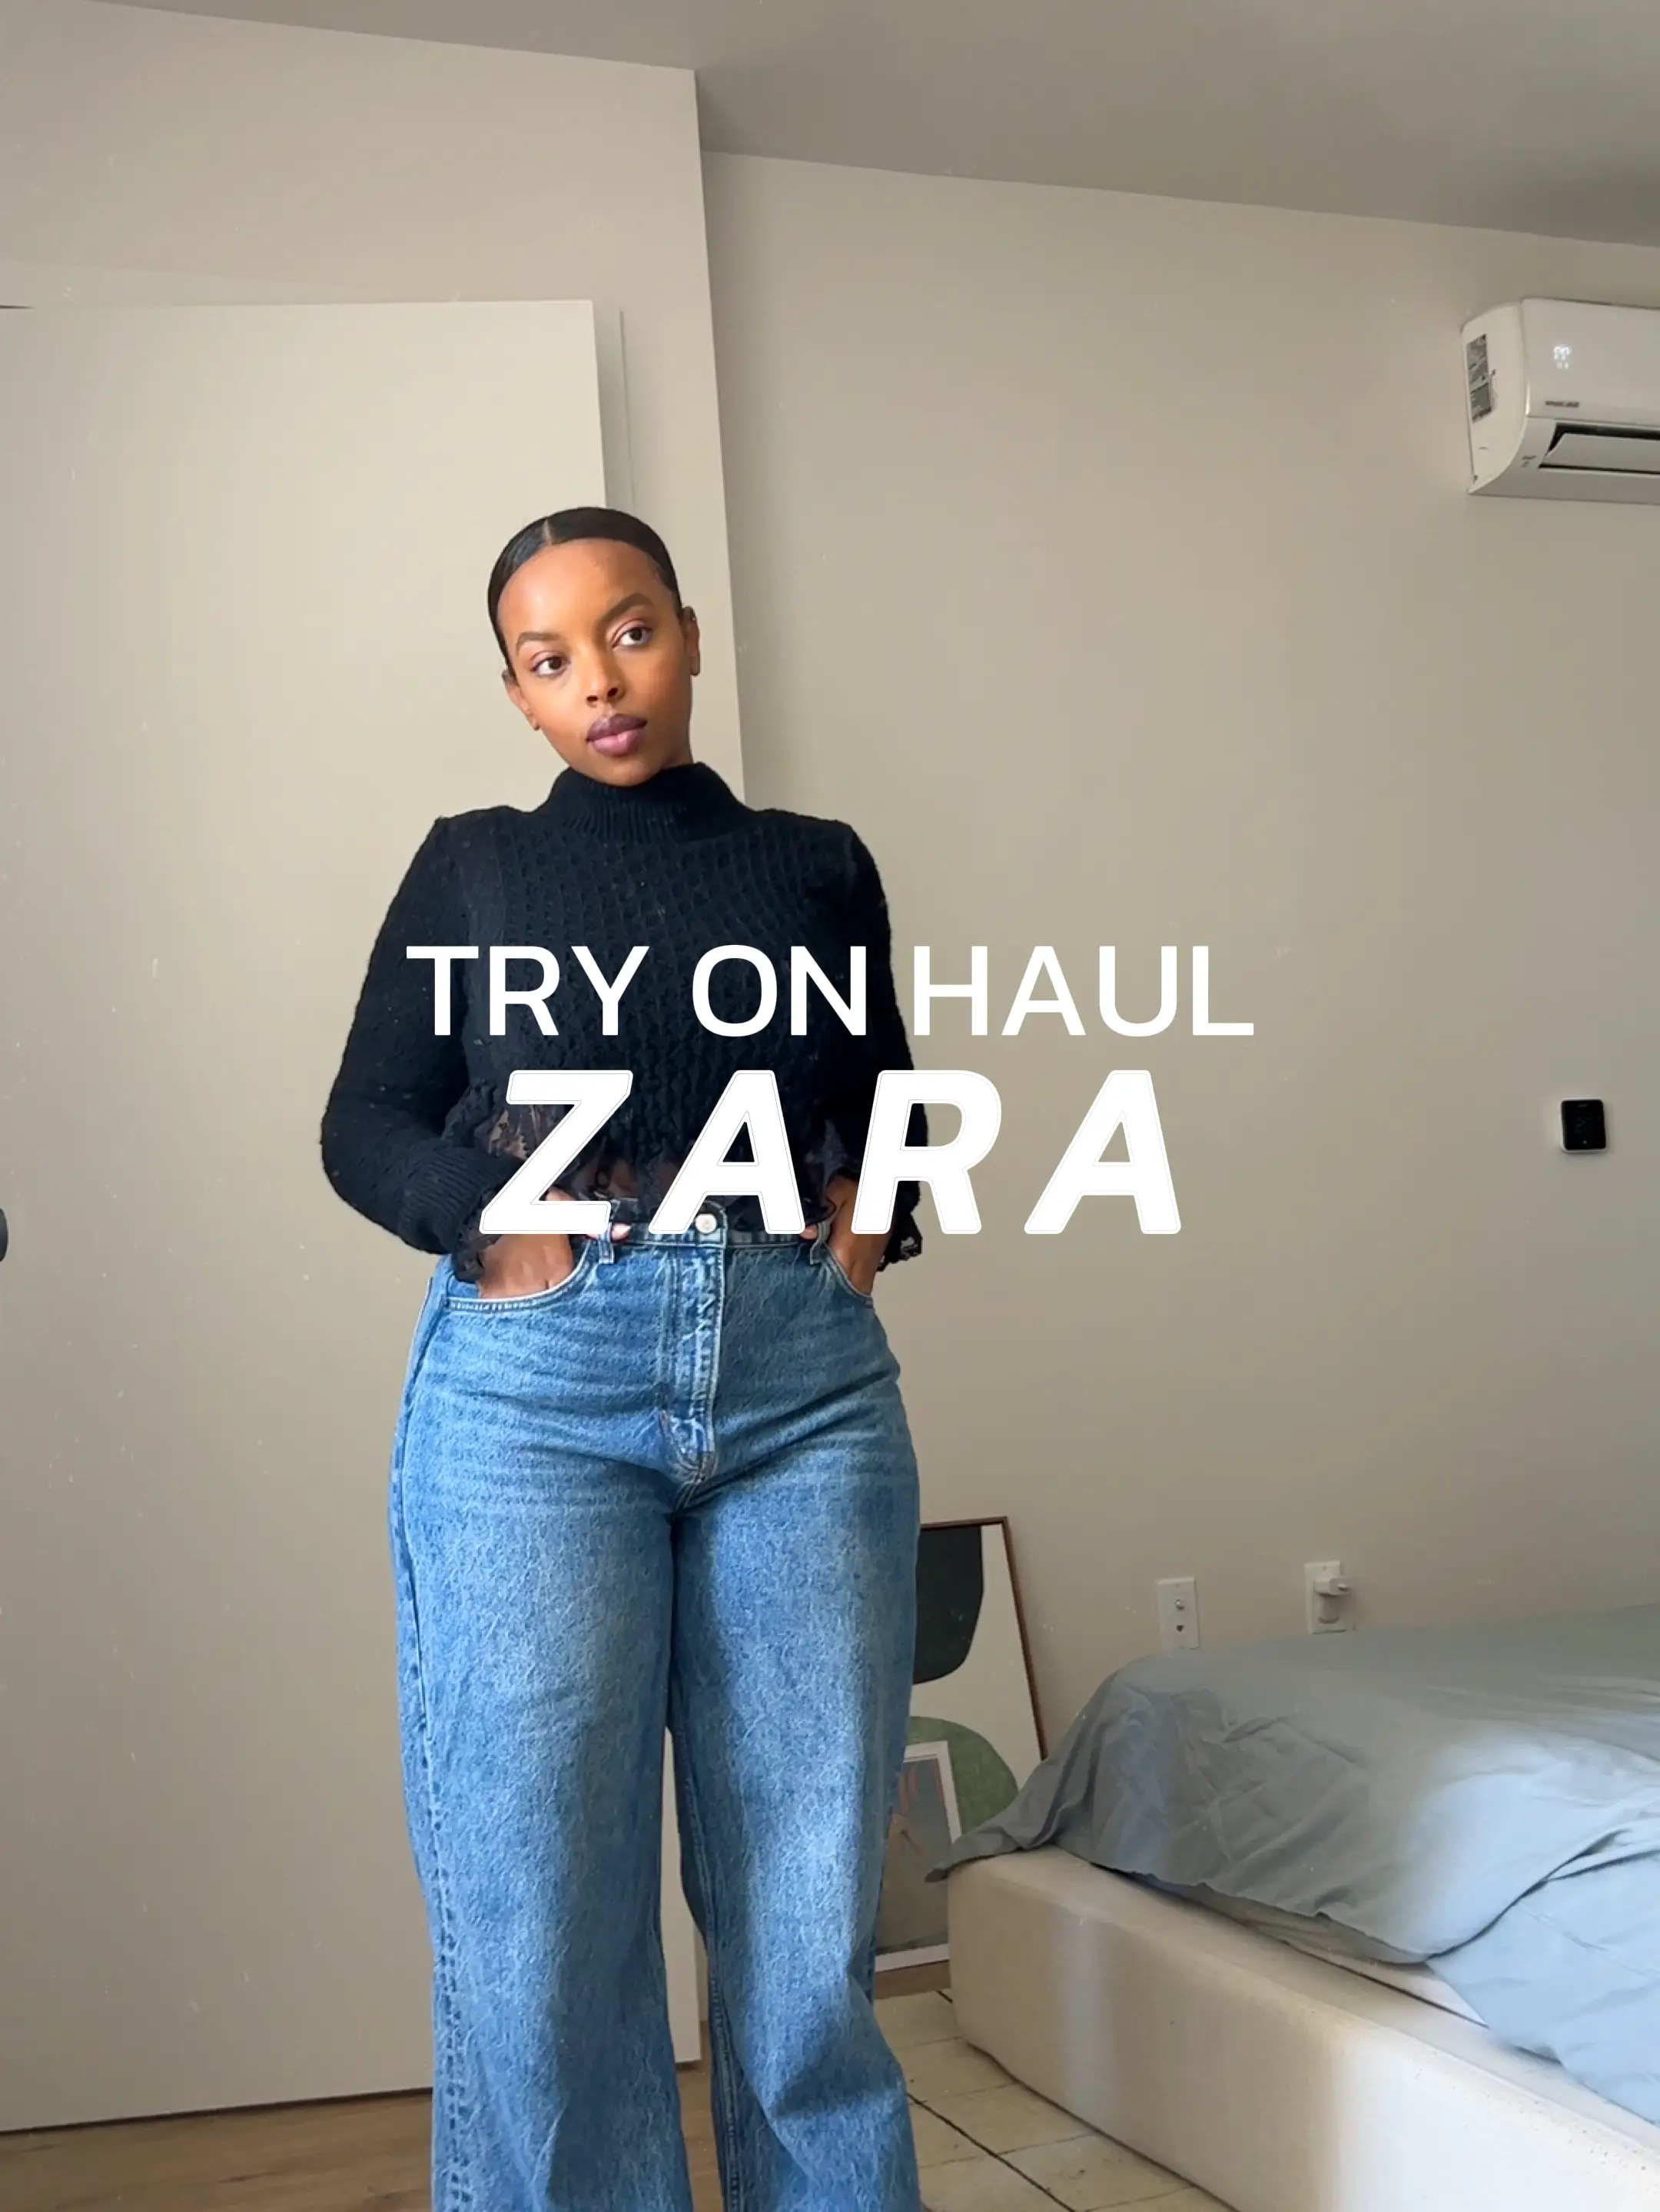 ZARA JEANS TRY ON HAUL  I found the perfect pair of jeans!! 